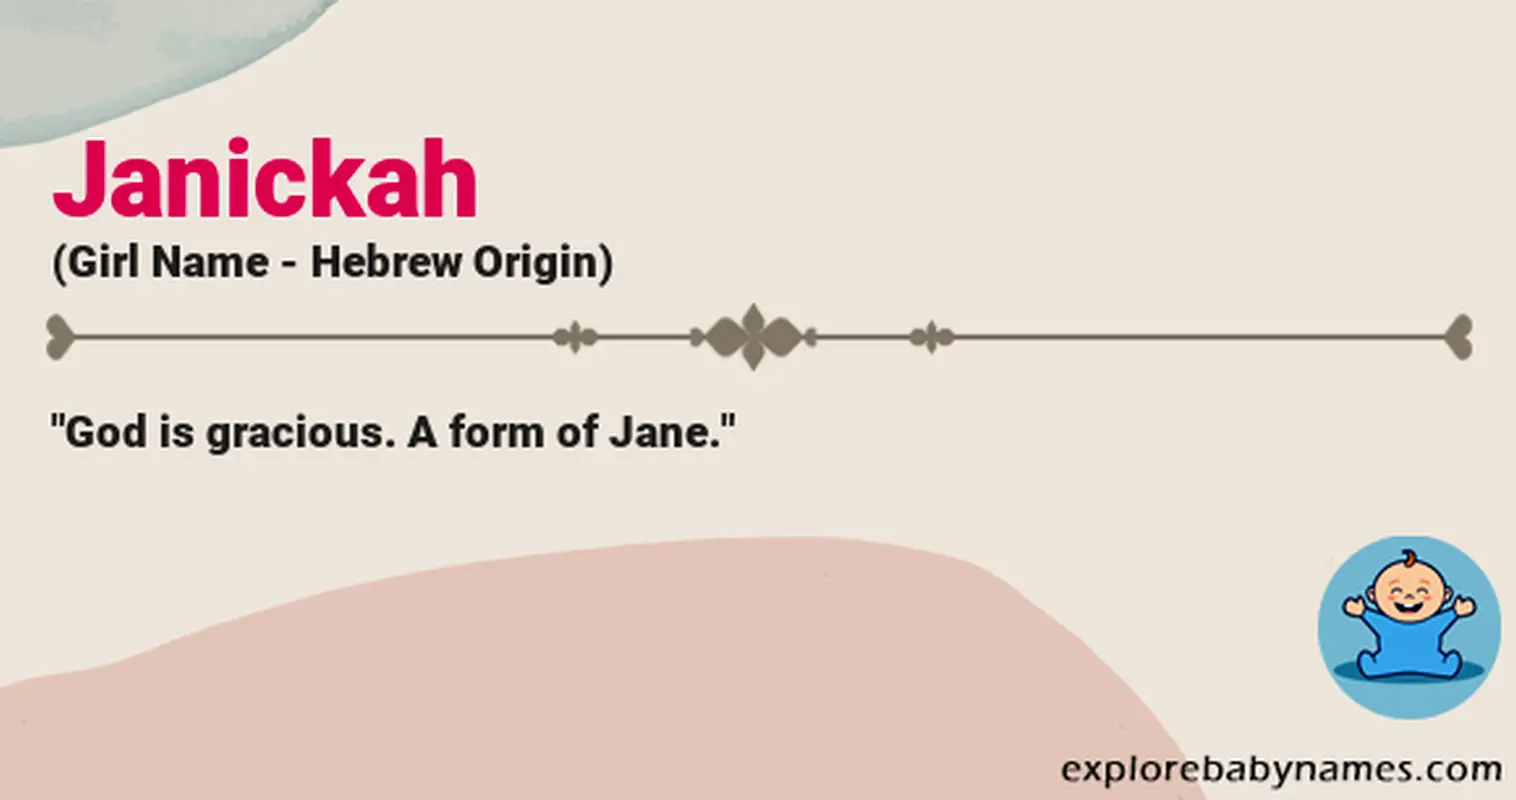 Meaning of Janickah